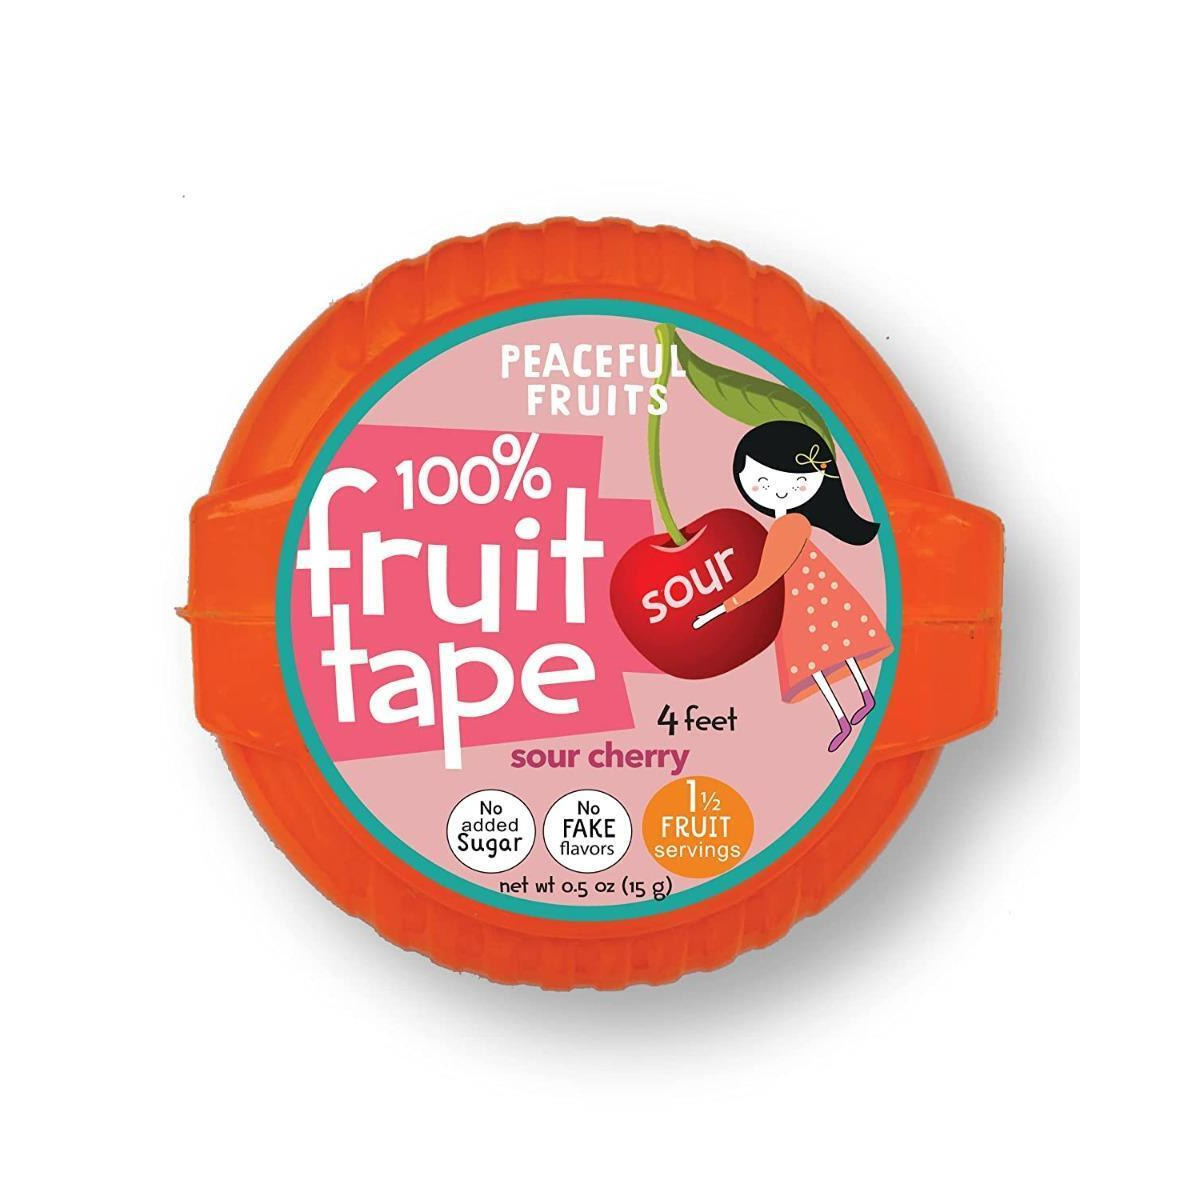 Peaceful Fruits KHRM02209452 0.5 oz Sour Cherry Fruit Tape Candy